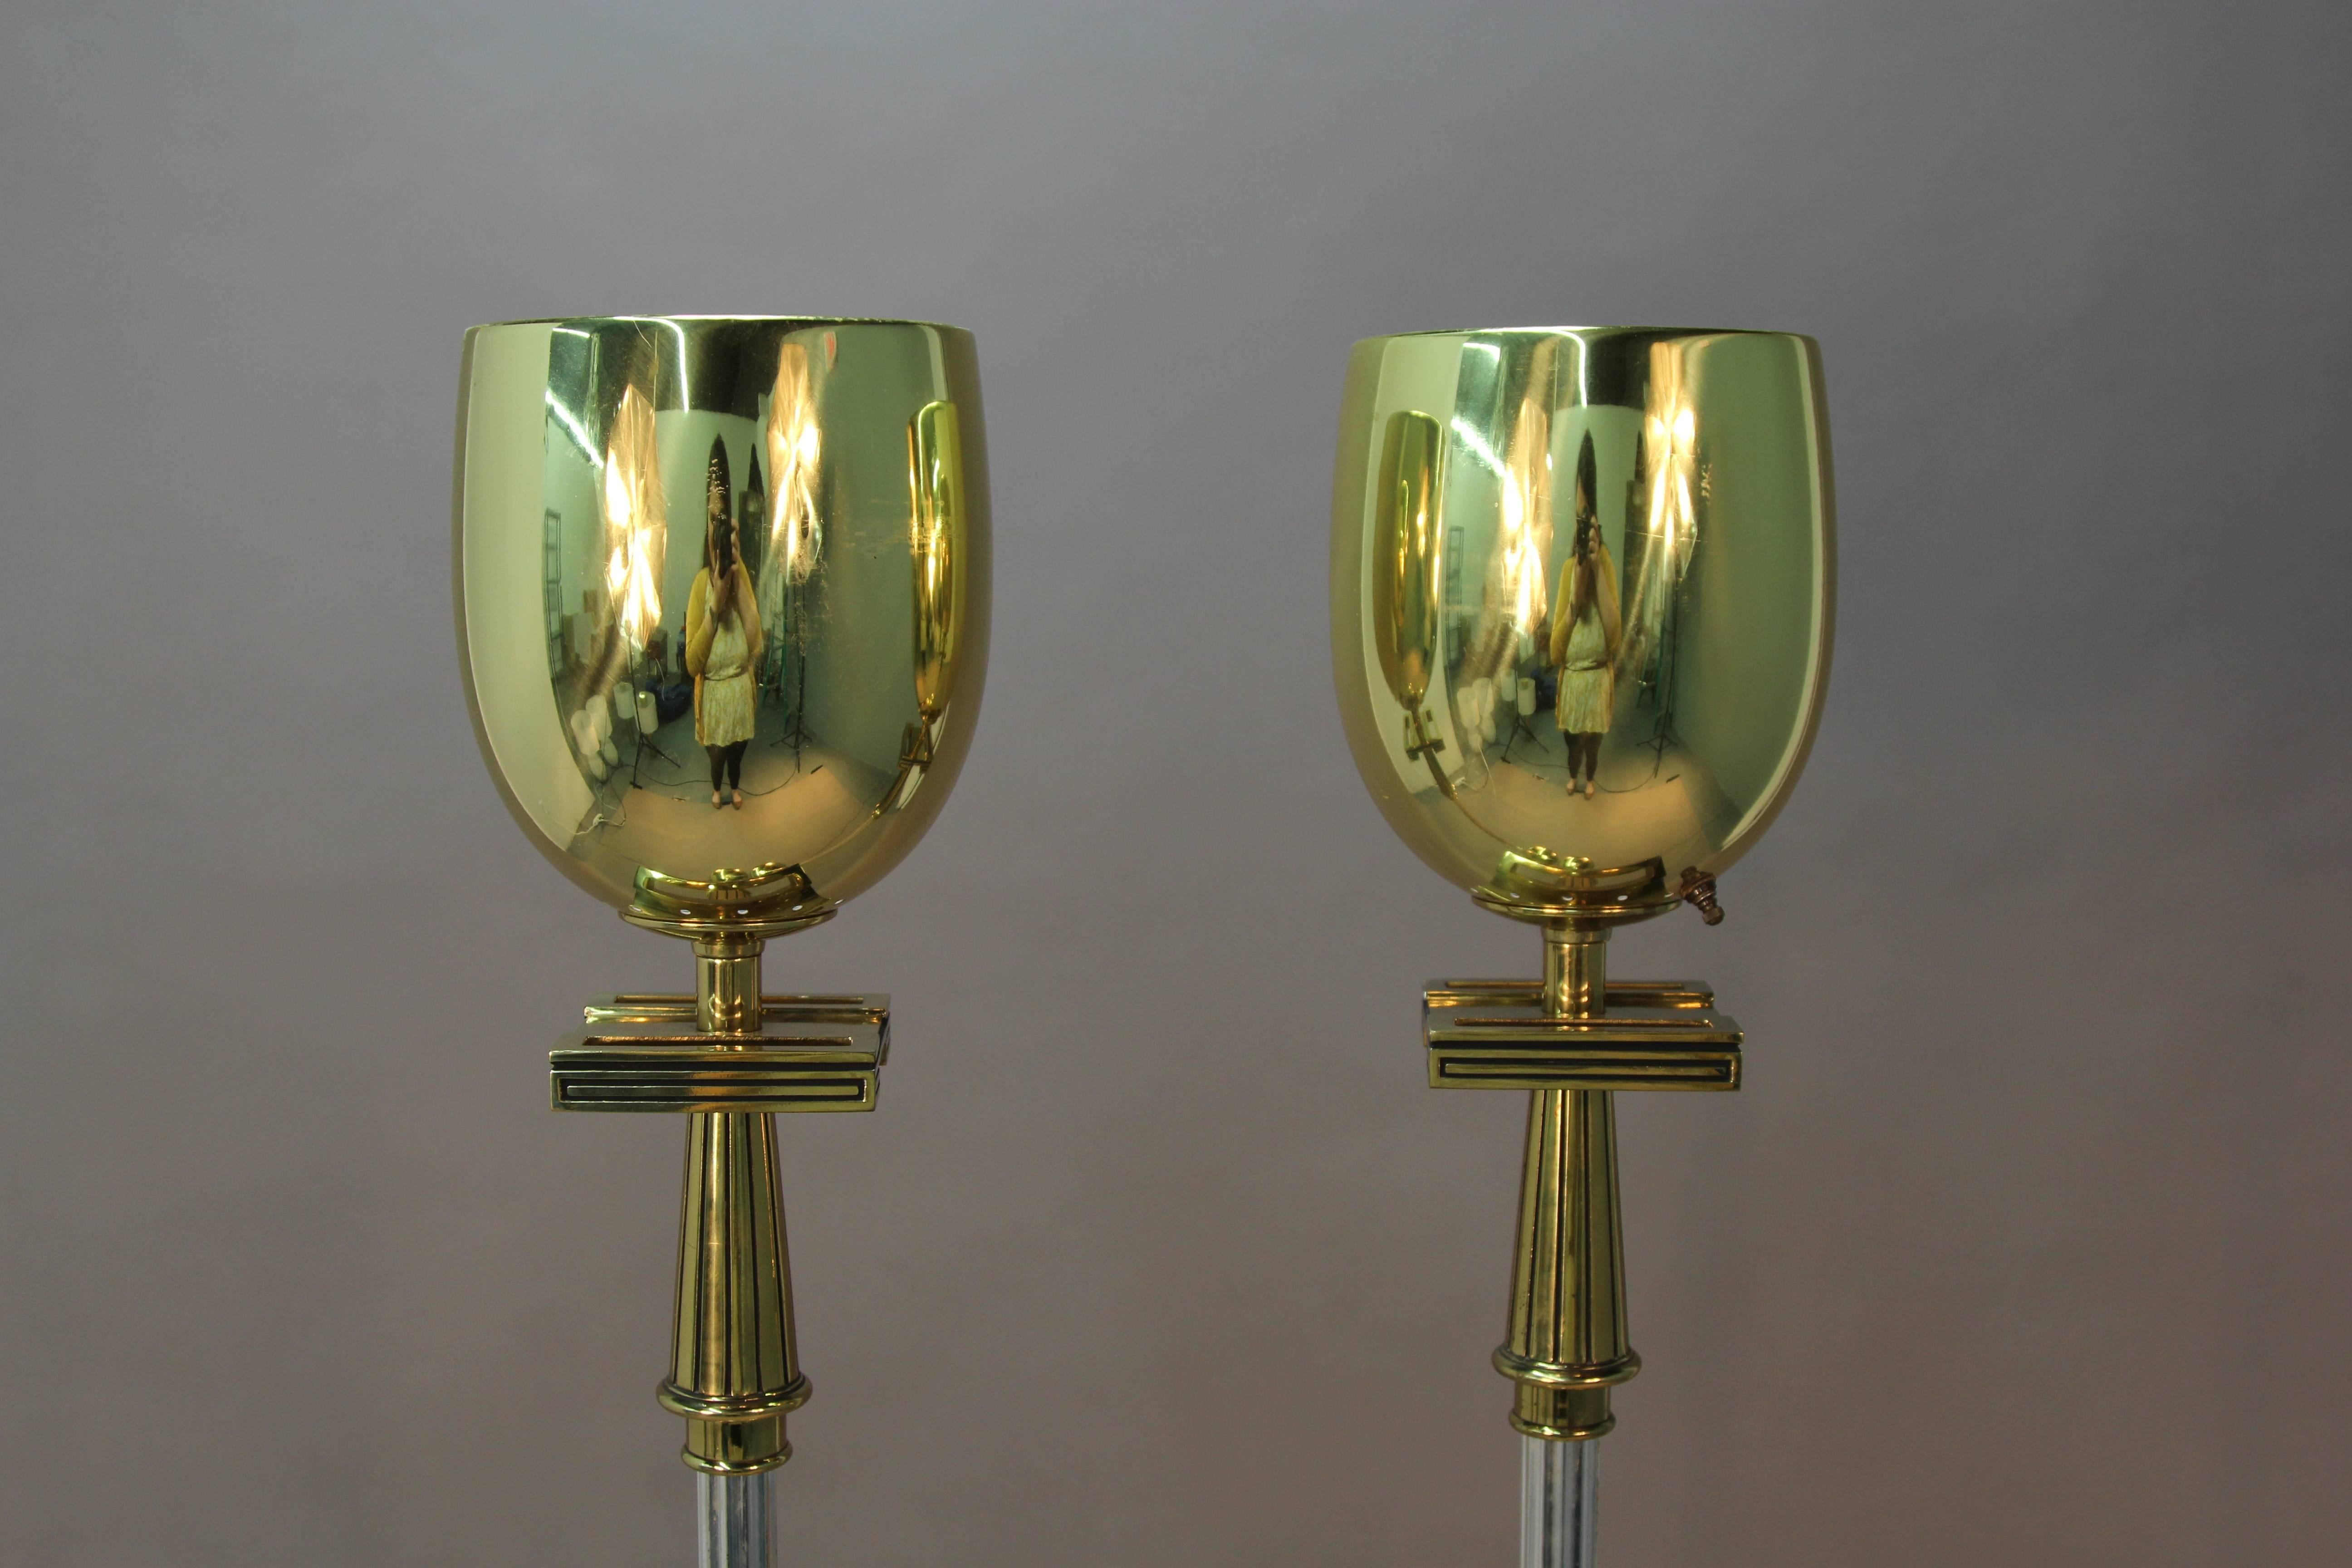 Brass and chrome floor lamps with Greek key detail.